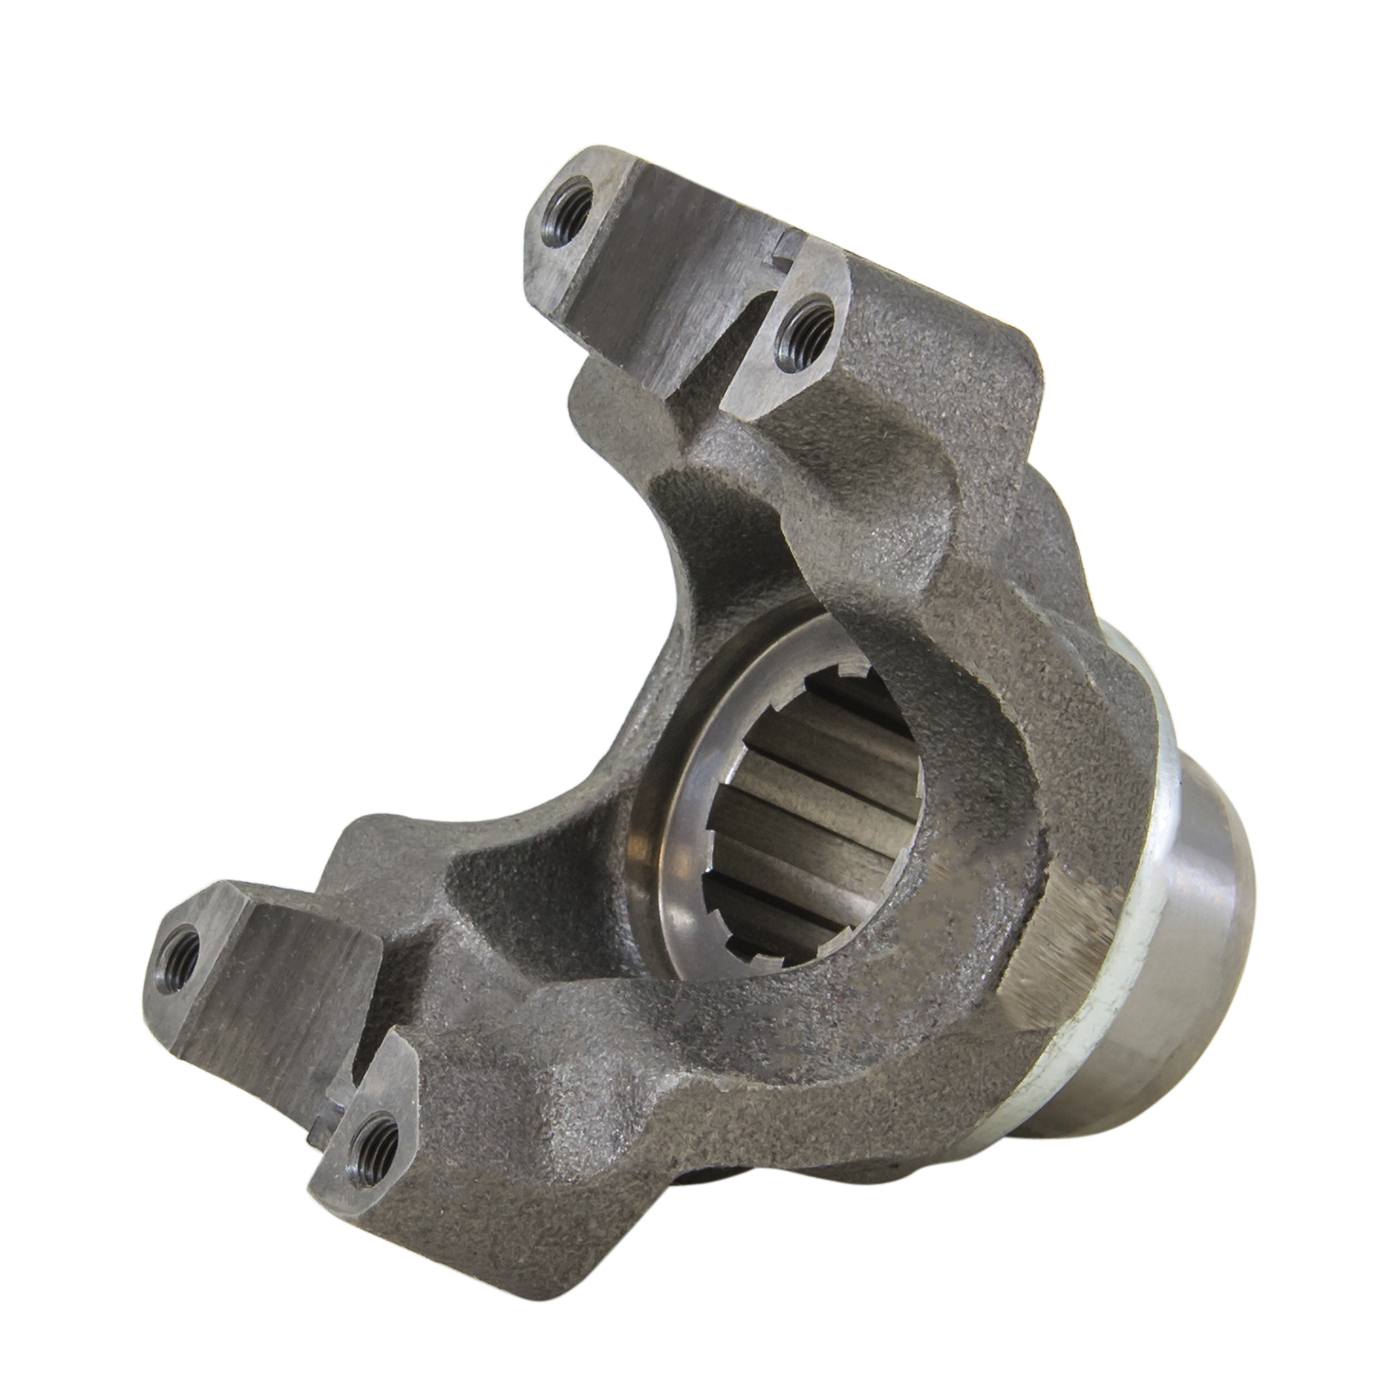 Yukon replacement yoke for Dana 44 with 10 spline and a 1310 U/Joint size 